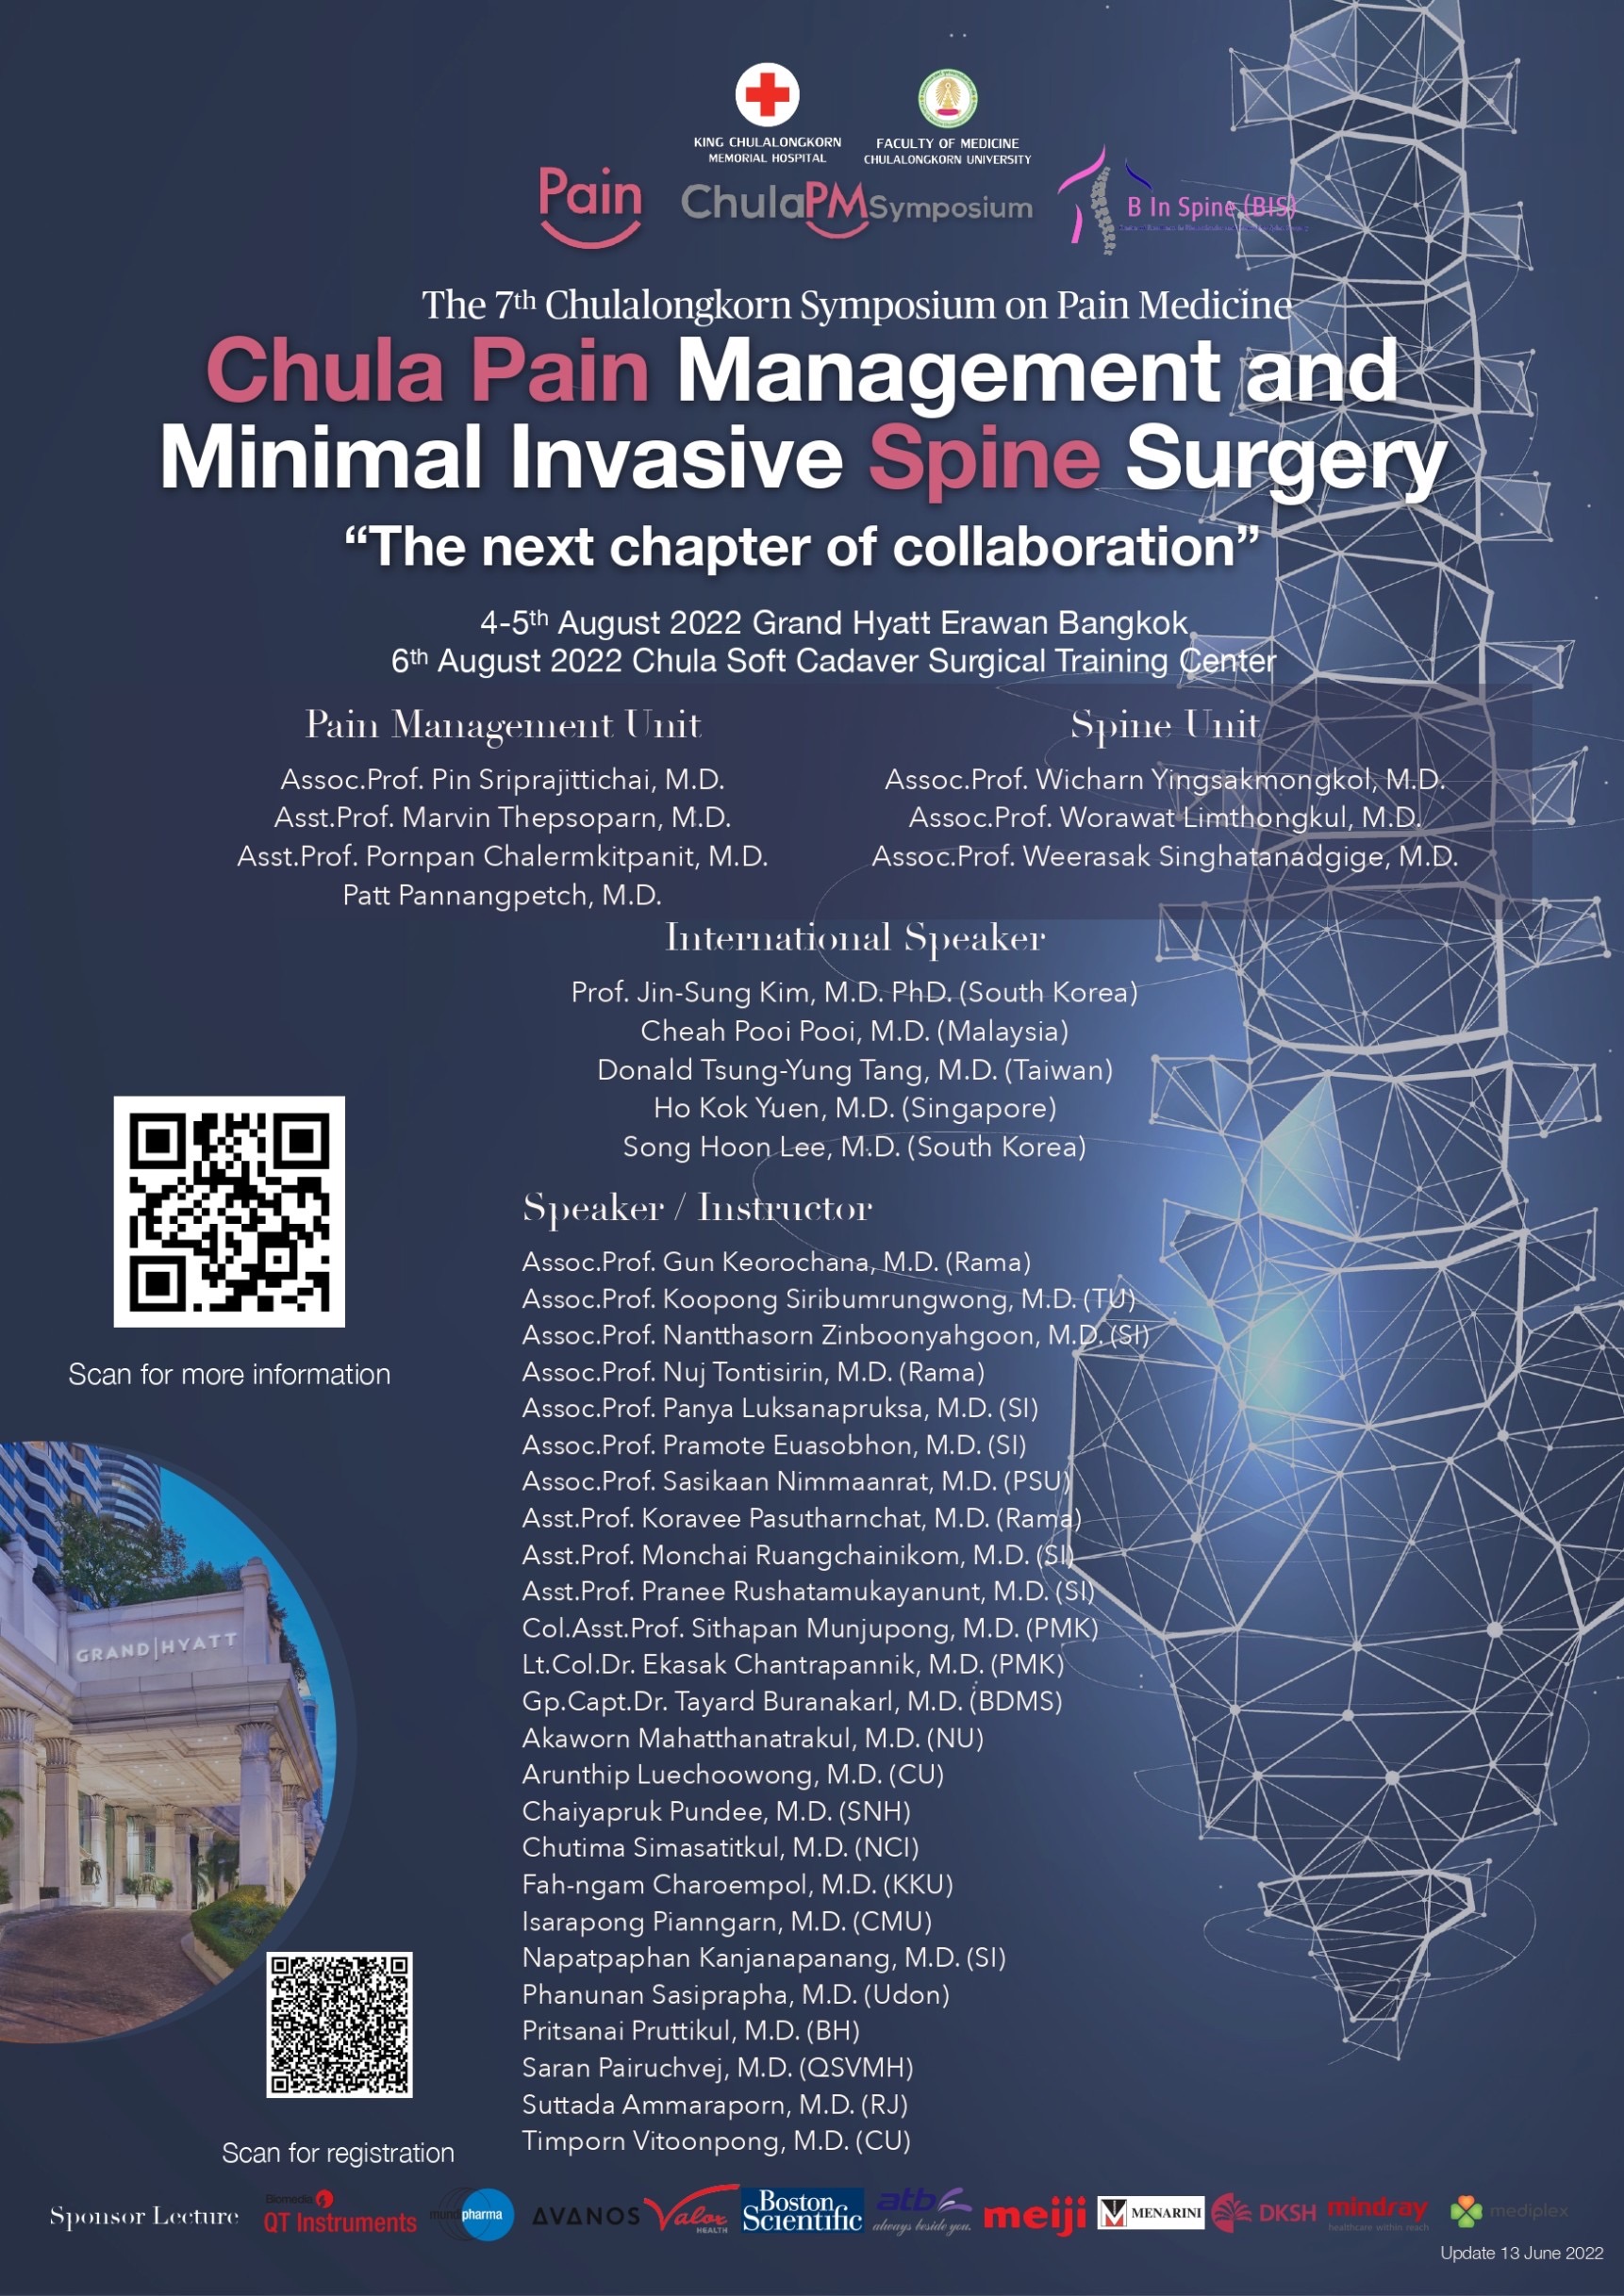 Chula Pain Management and Minimal Invasive Spine Surgery “The next chapter of collaboration”